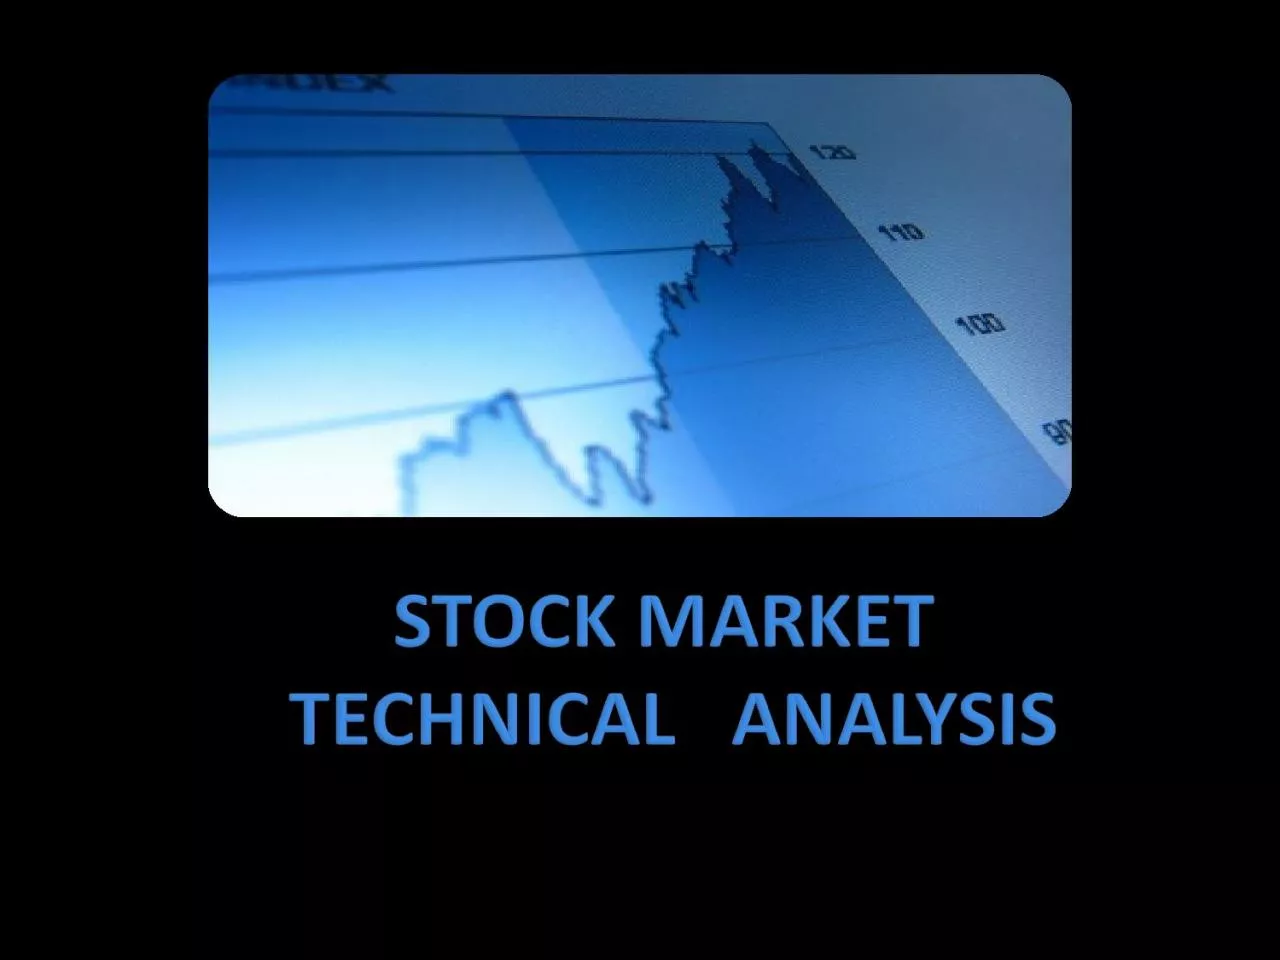 Analysis of statistics generated by market activity such as past price and volume to com